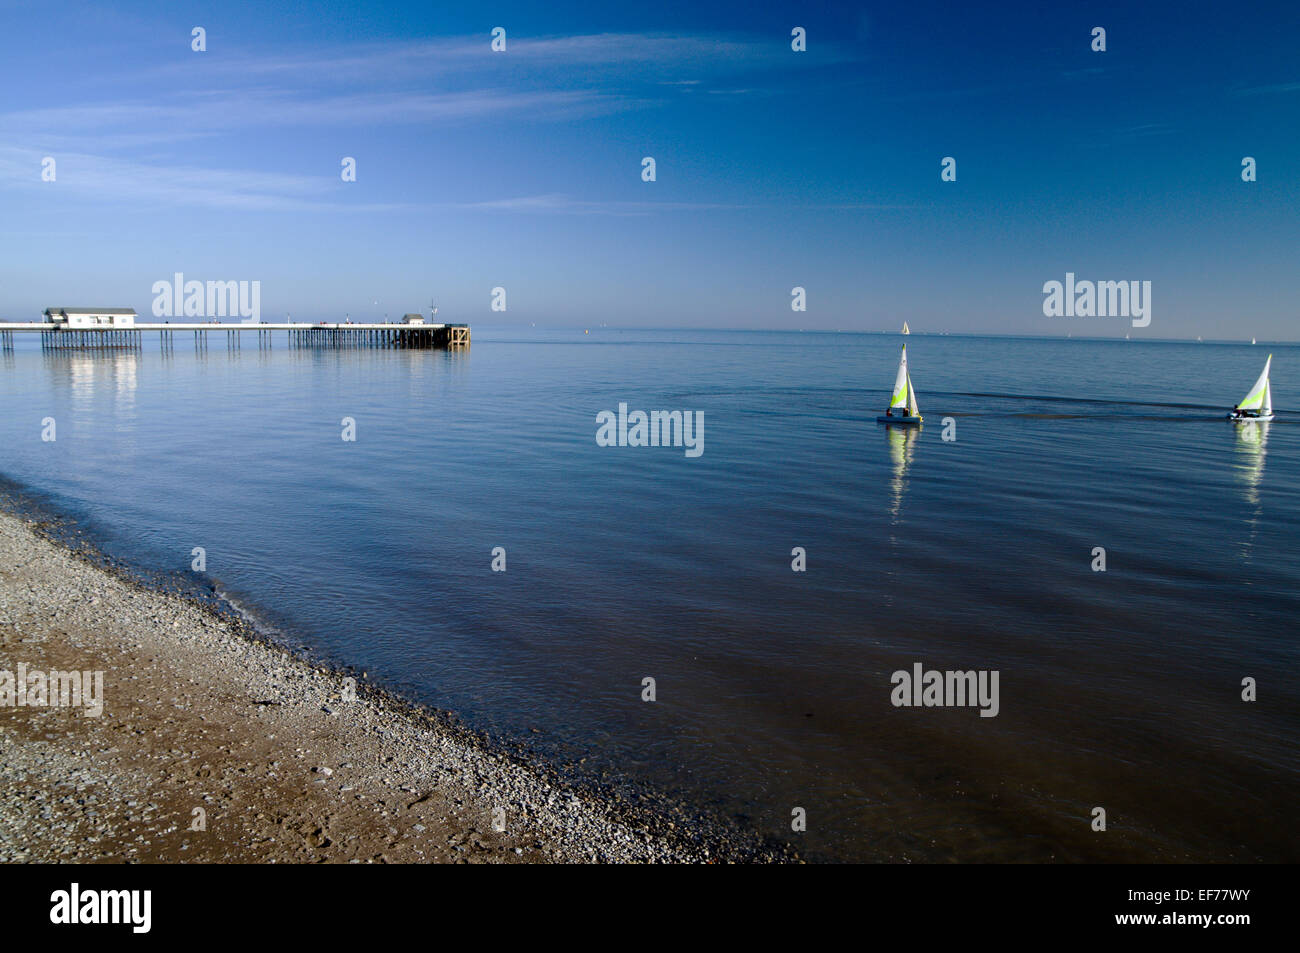 Dinghies from Penarth Yacht Club sailing off Penarth, Vale of Glamorgan, South Wales, UK. Stock Photo